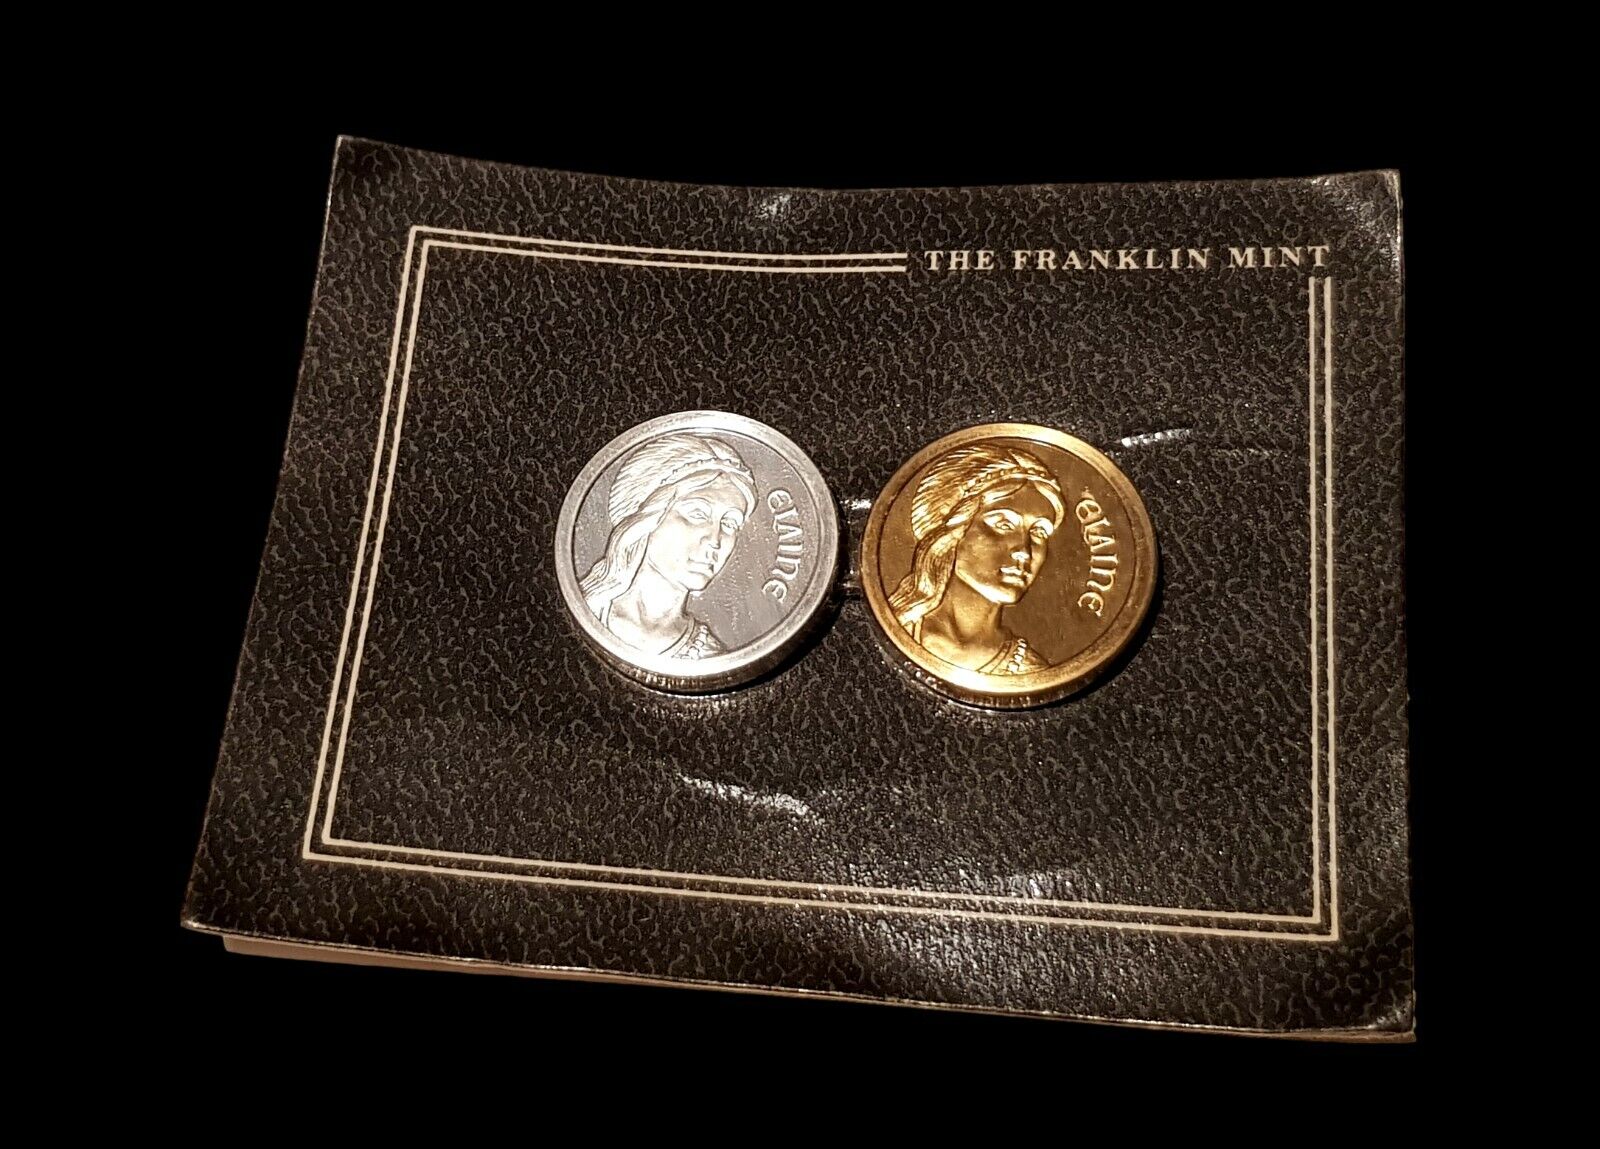 1983 - The Franklin Mint - ELAINE Game Coins - Still Sealed - Extremely RARE